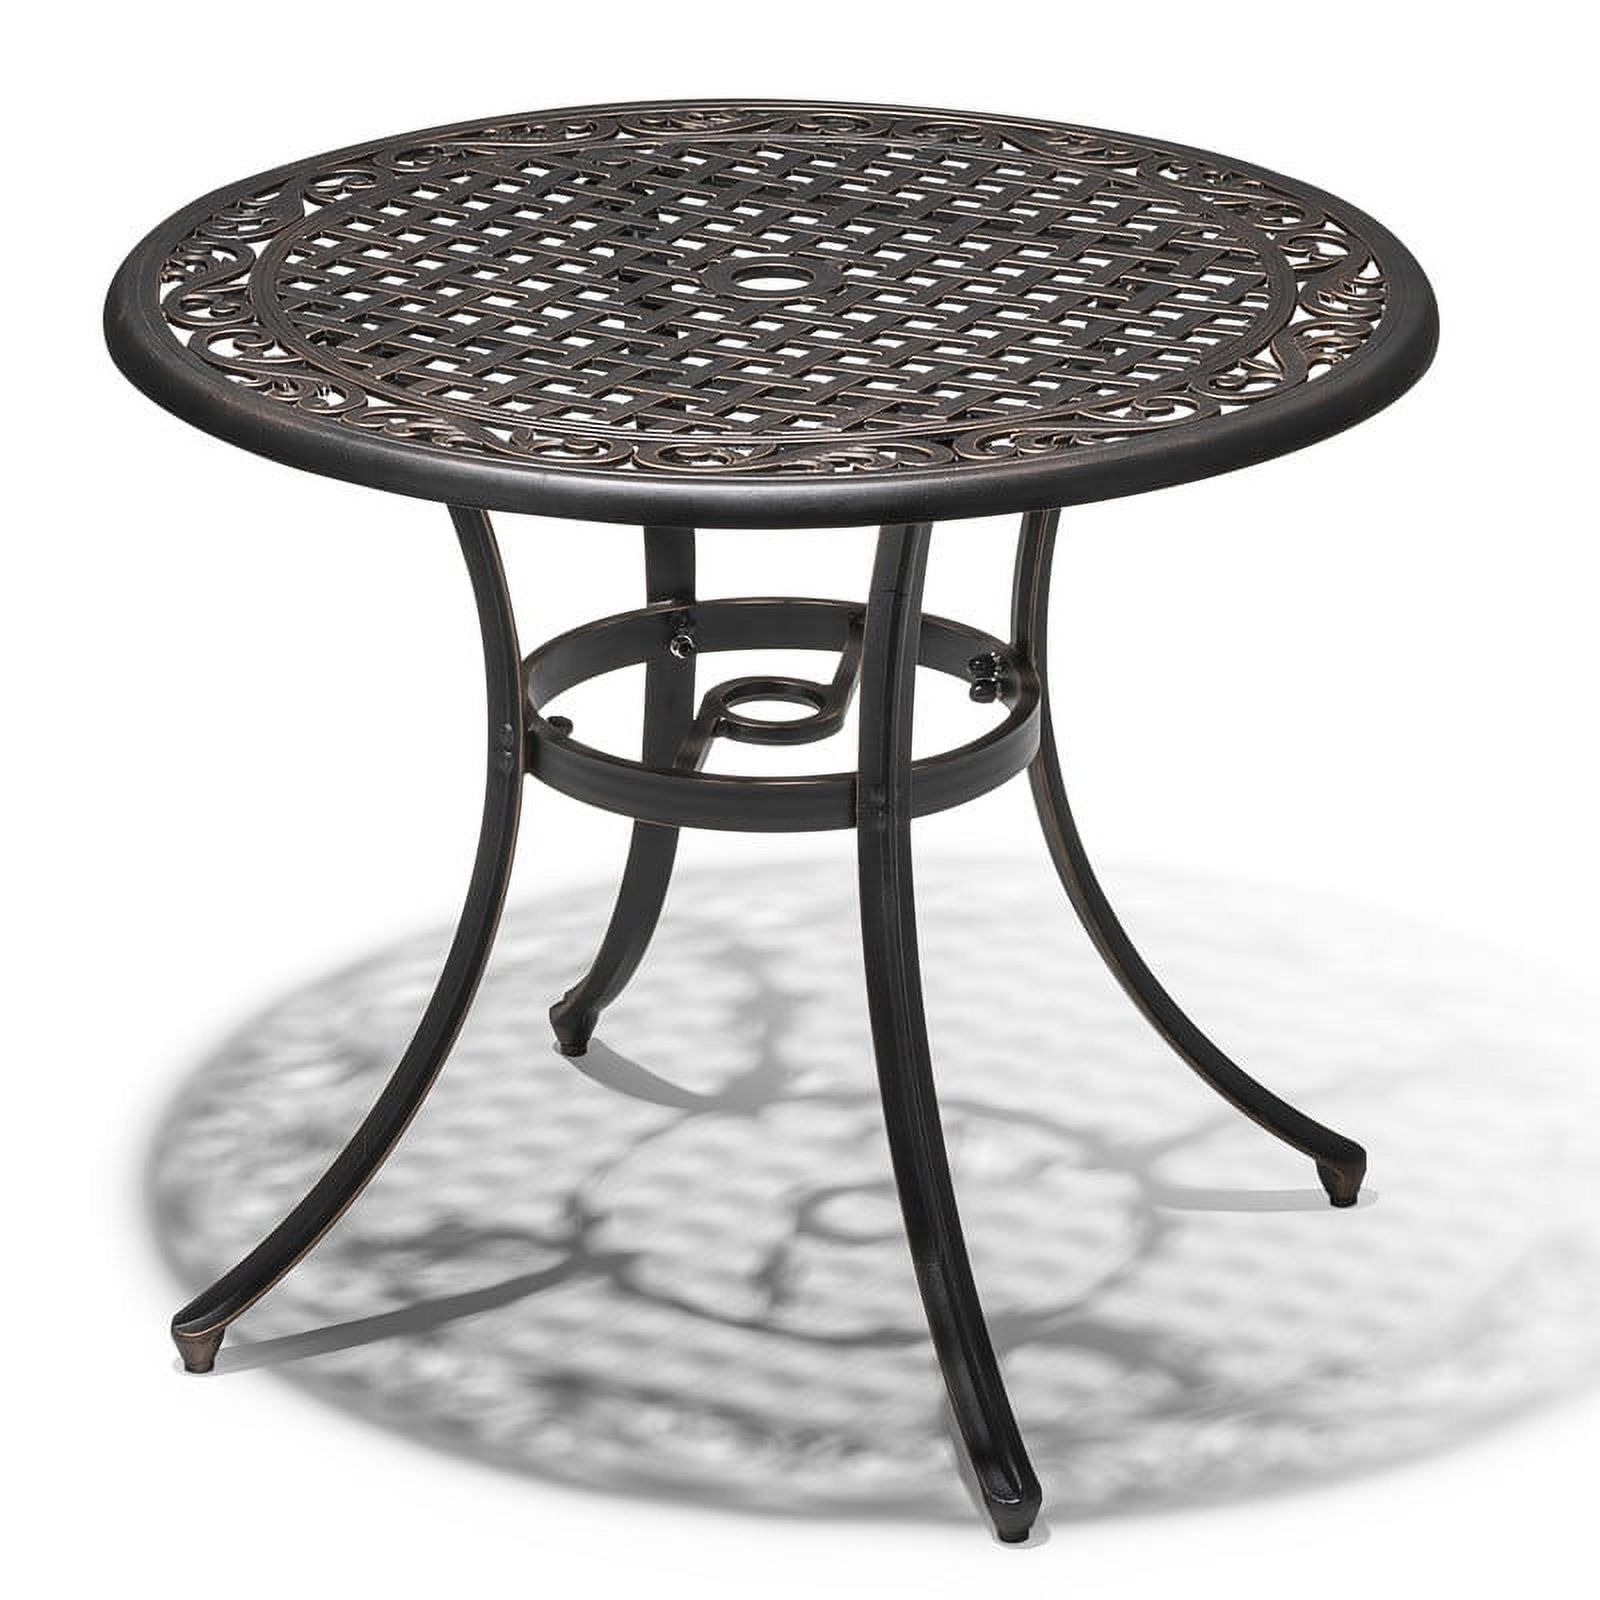 Nuu Garden 36" Cast Aluminum Outdoor Dining Table Round Patio Bistro Dining Table with Umbrella Hole,Black with Antique Bronze at The Edge - image 1 of 9